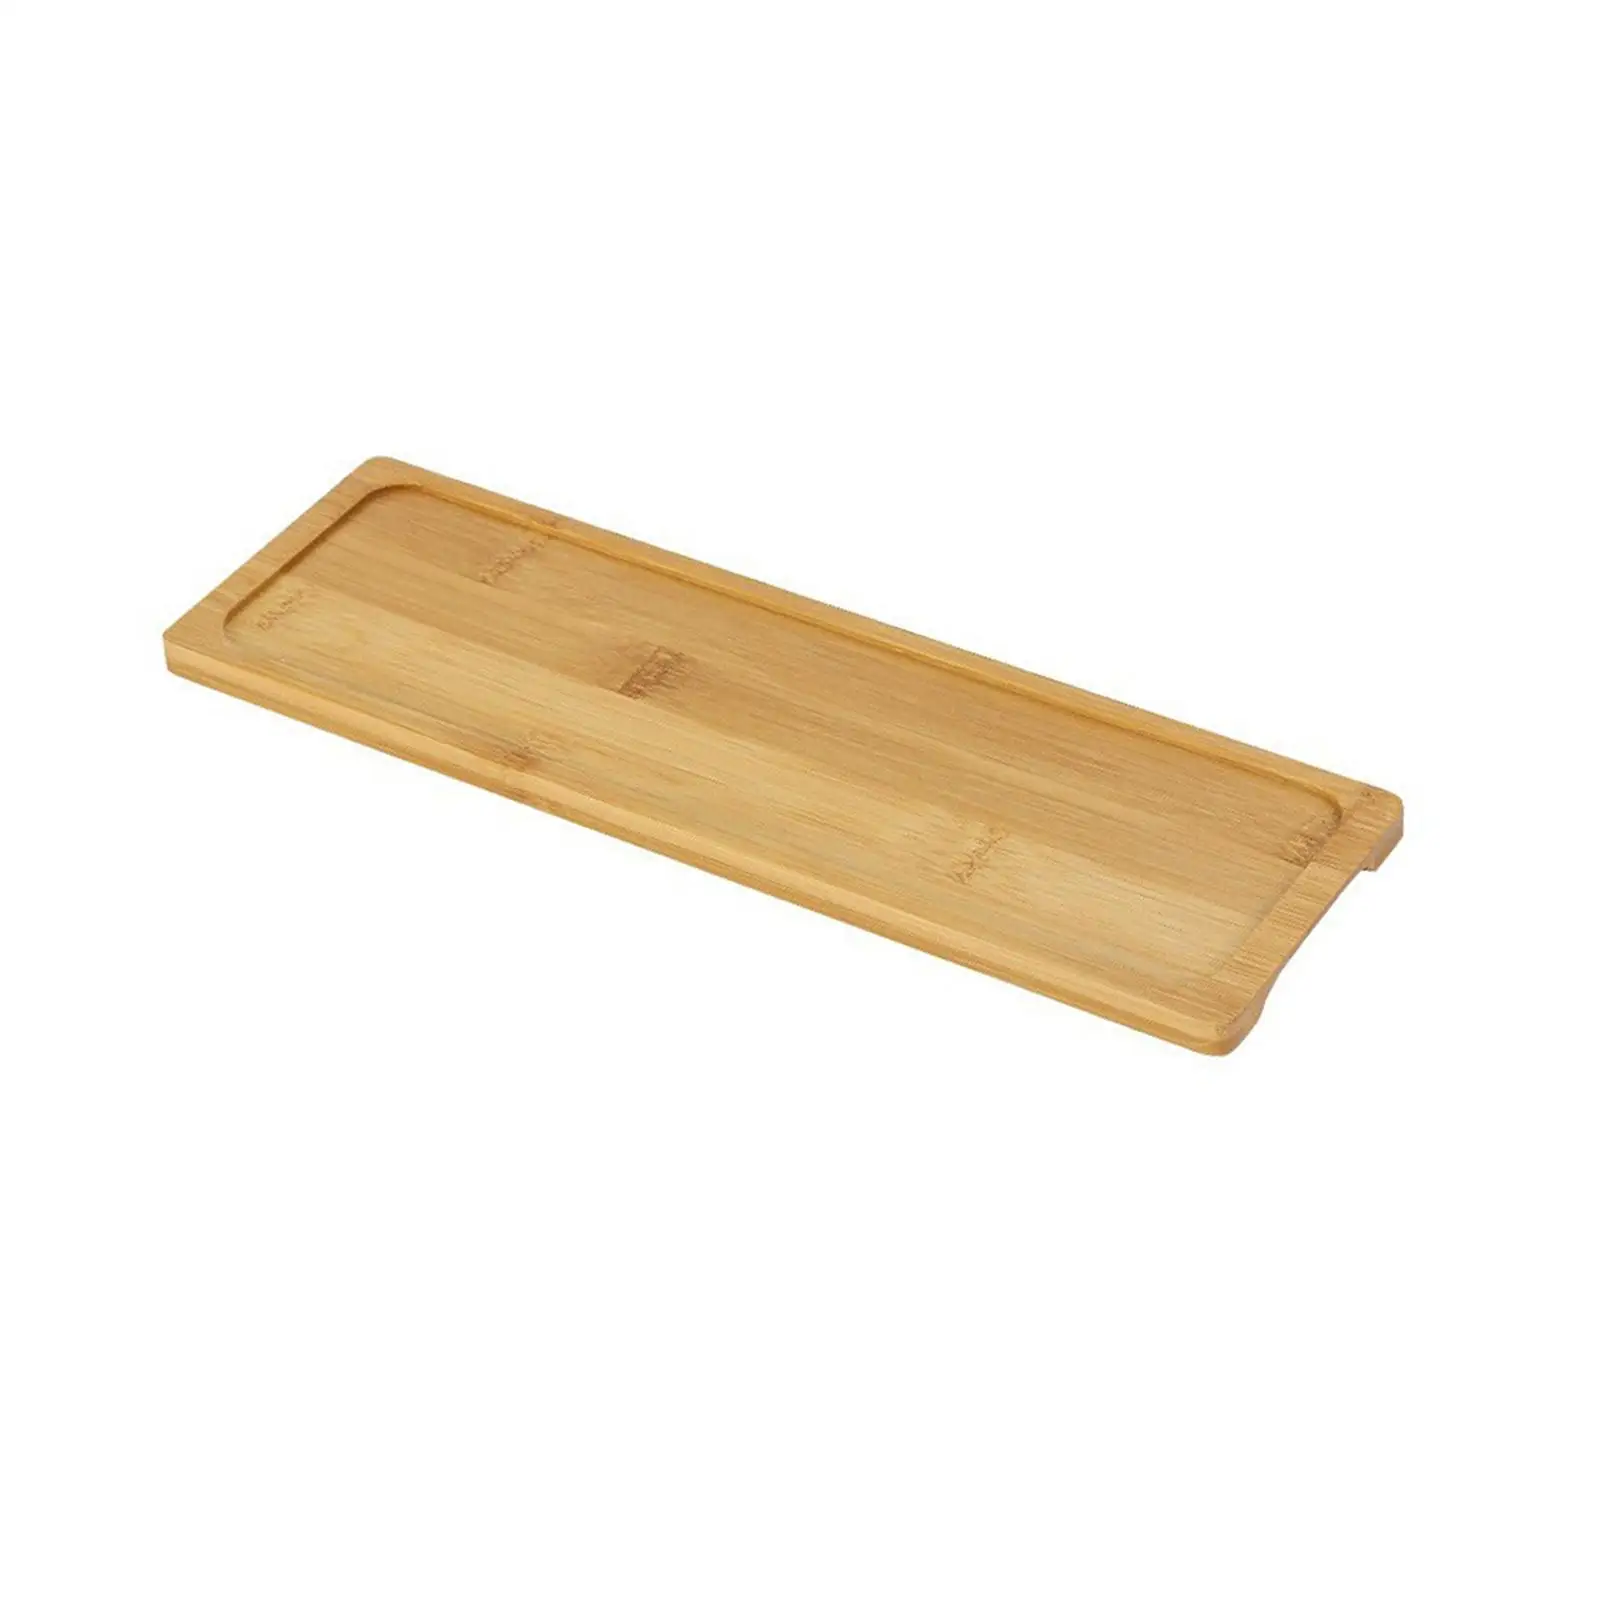 Rectangular Tray decor Durable Vanity Bathroom Trays for Soap Bottle Accessories